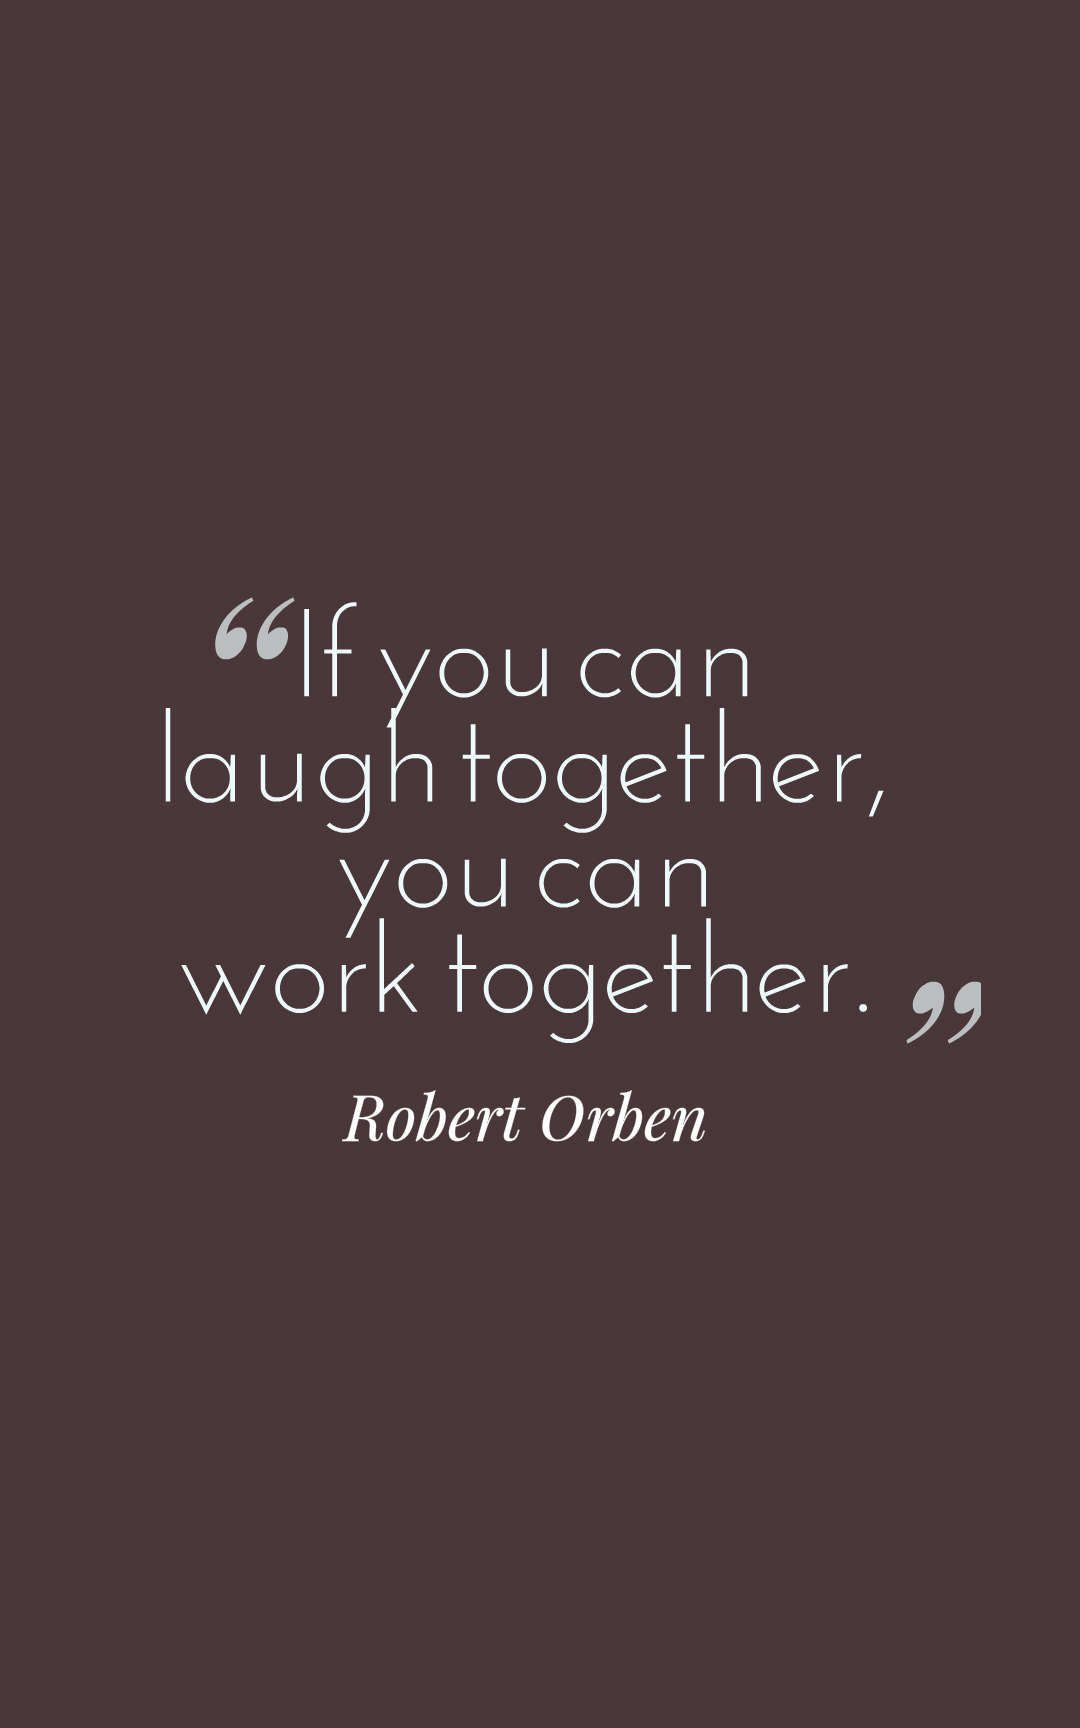 If you can laugh together, you can work together